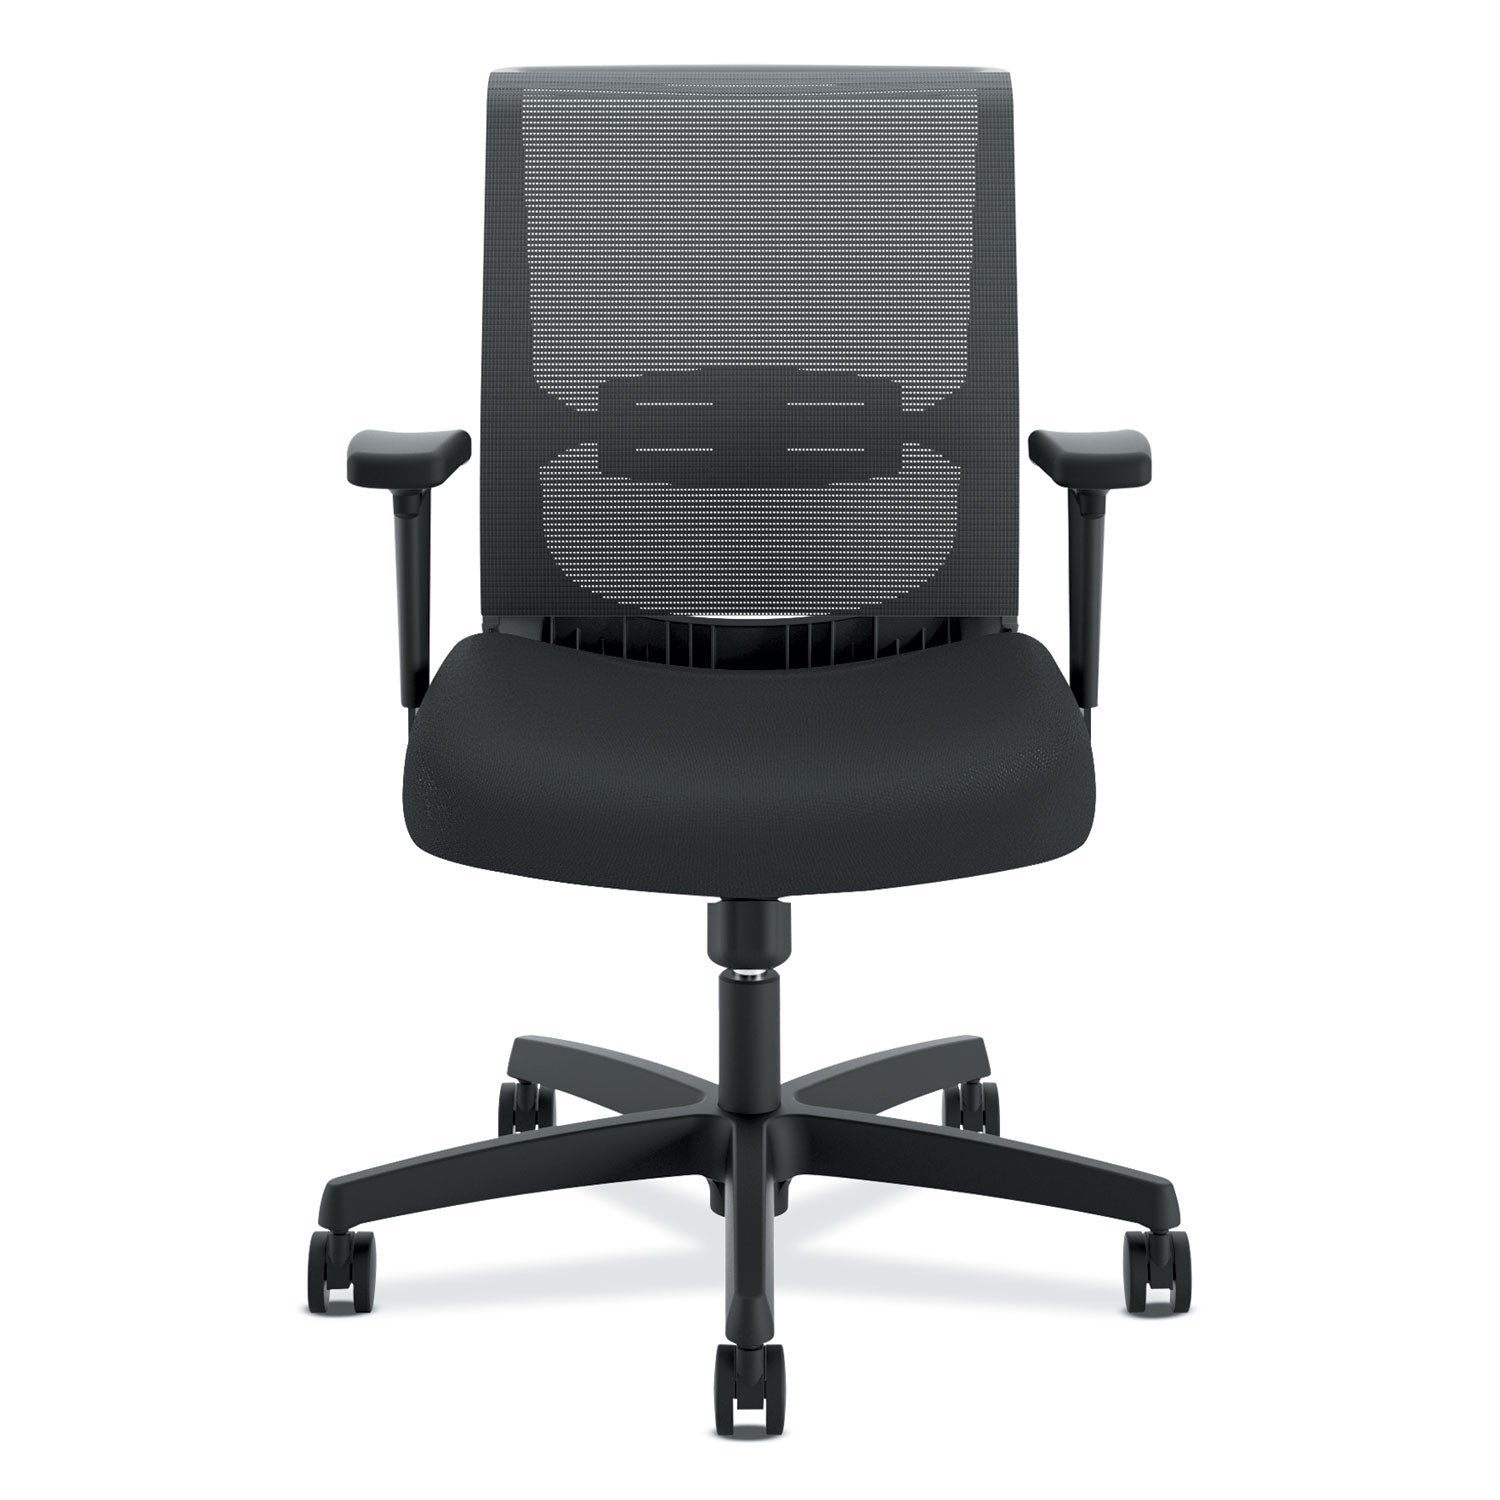 convergence-mid-back-task-chair-swivel-tilt-supports-up-to-275-lb-1575-to-2013-seat-height-black_honcms1aaccf10 - 1